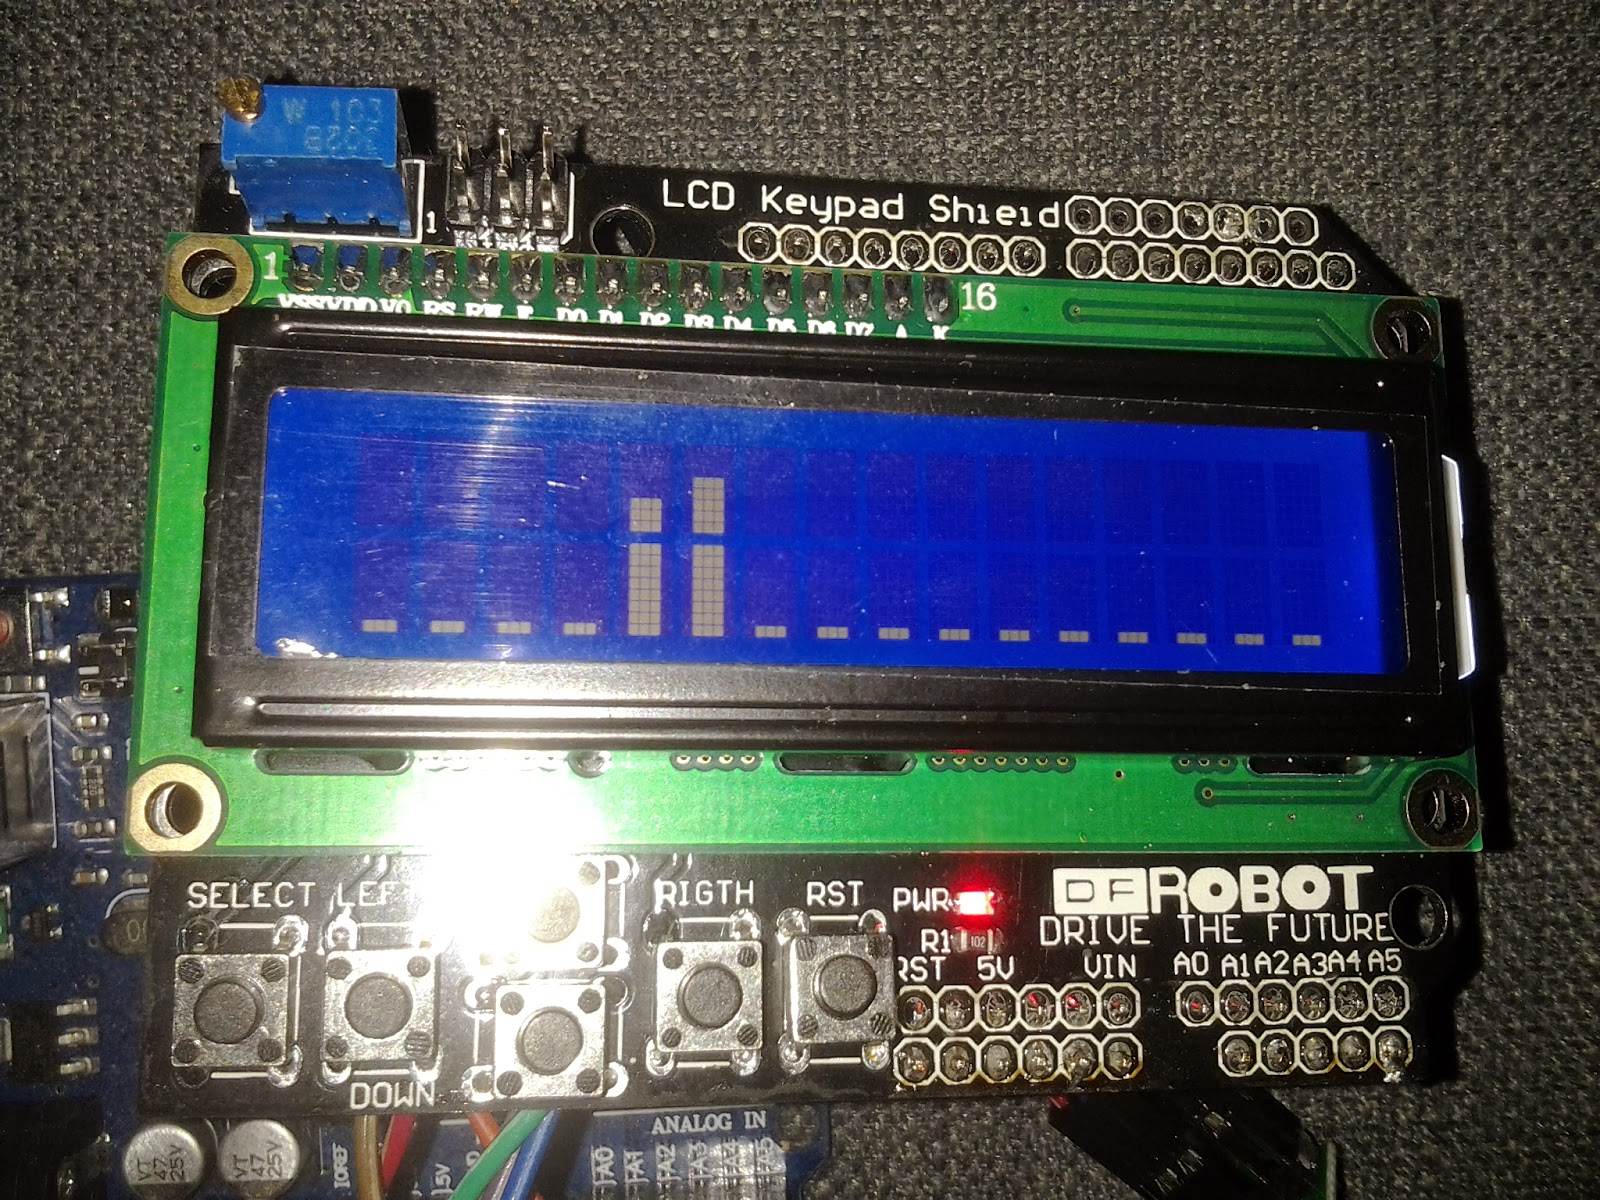 nrf24l01 example code using 2 led